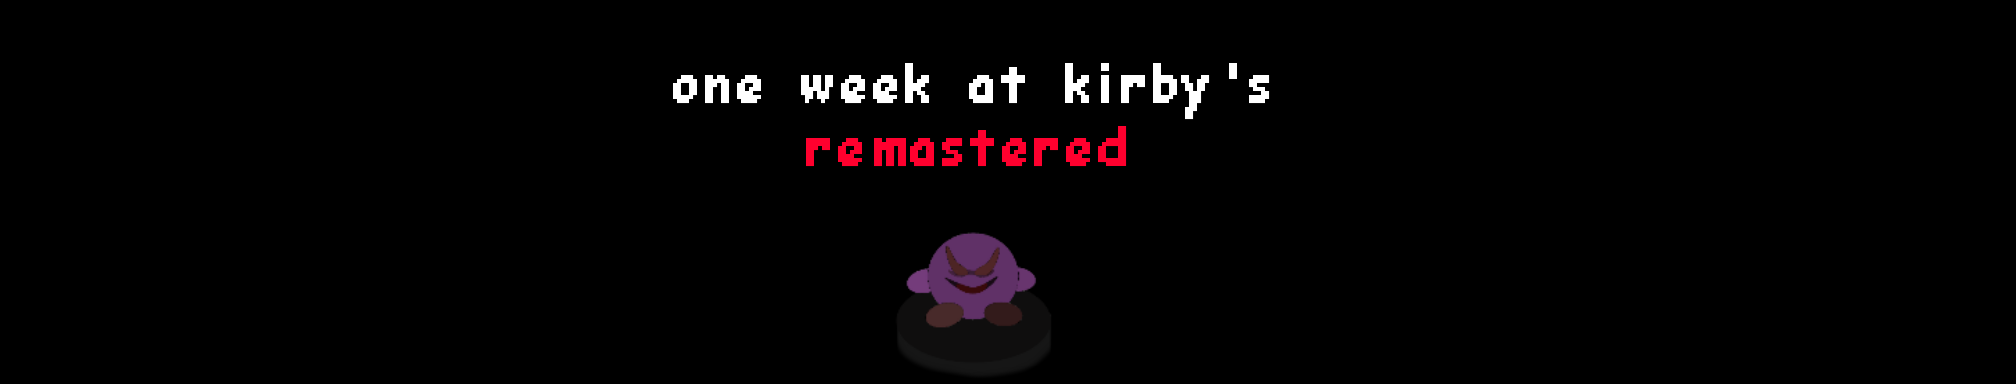 One Week At Kirby's Remastered